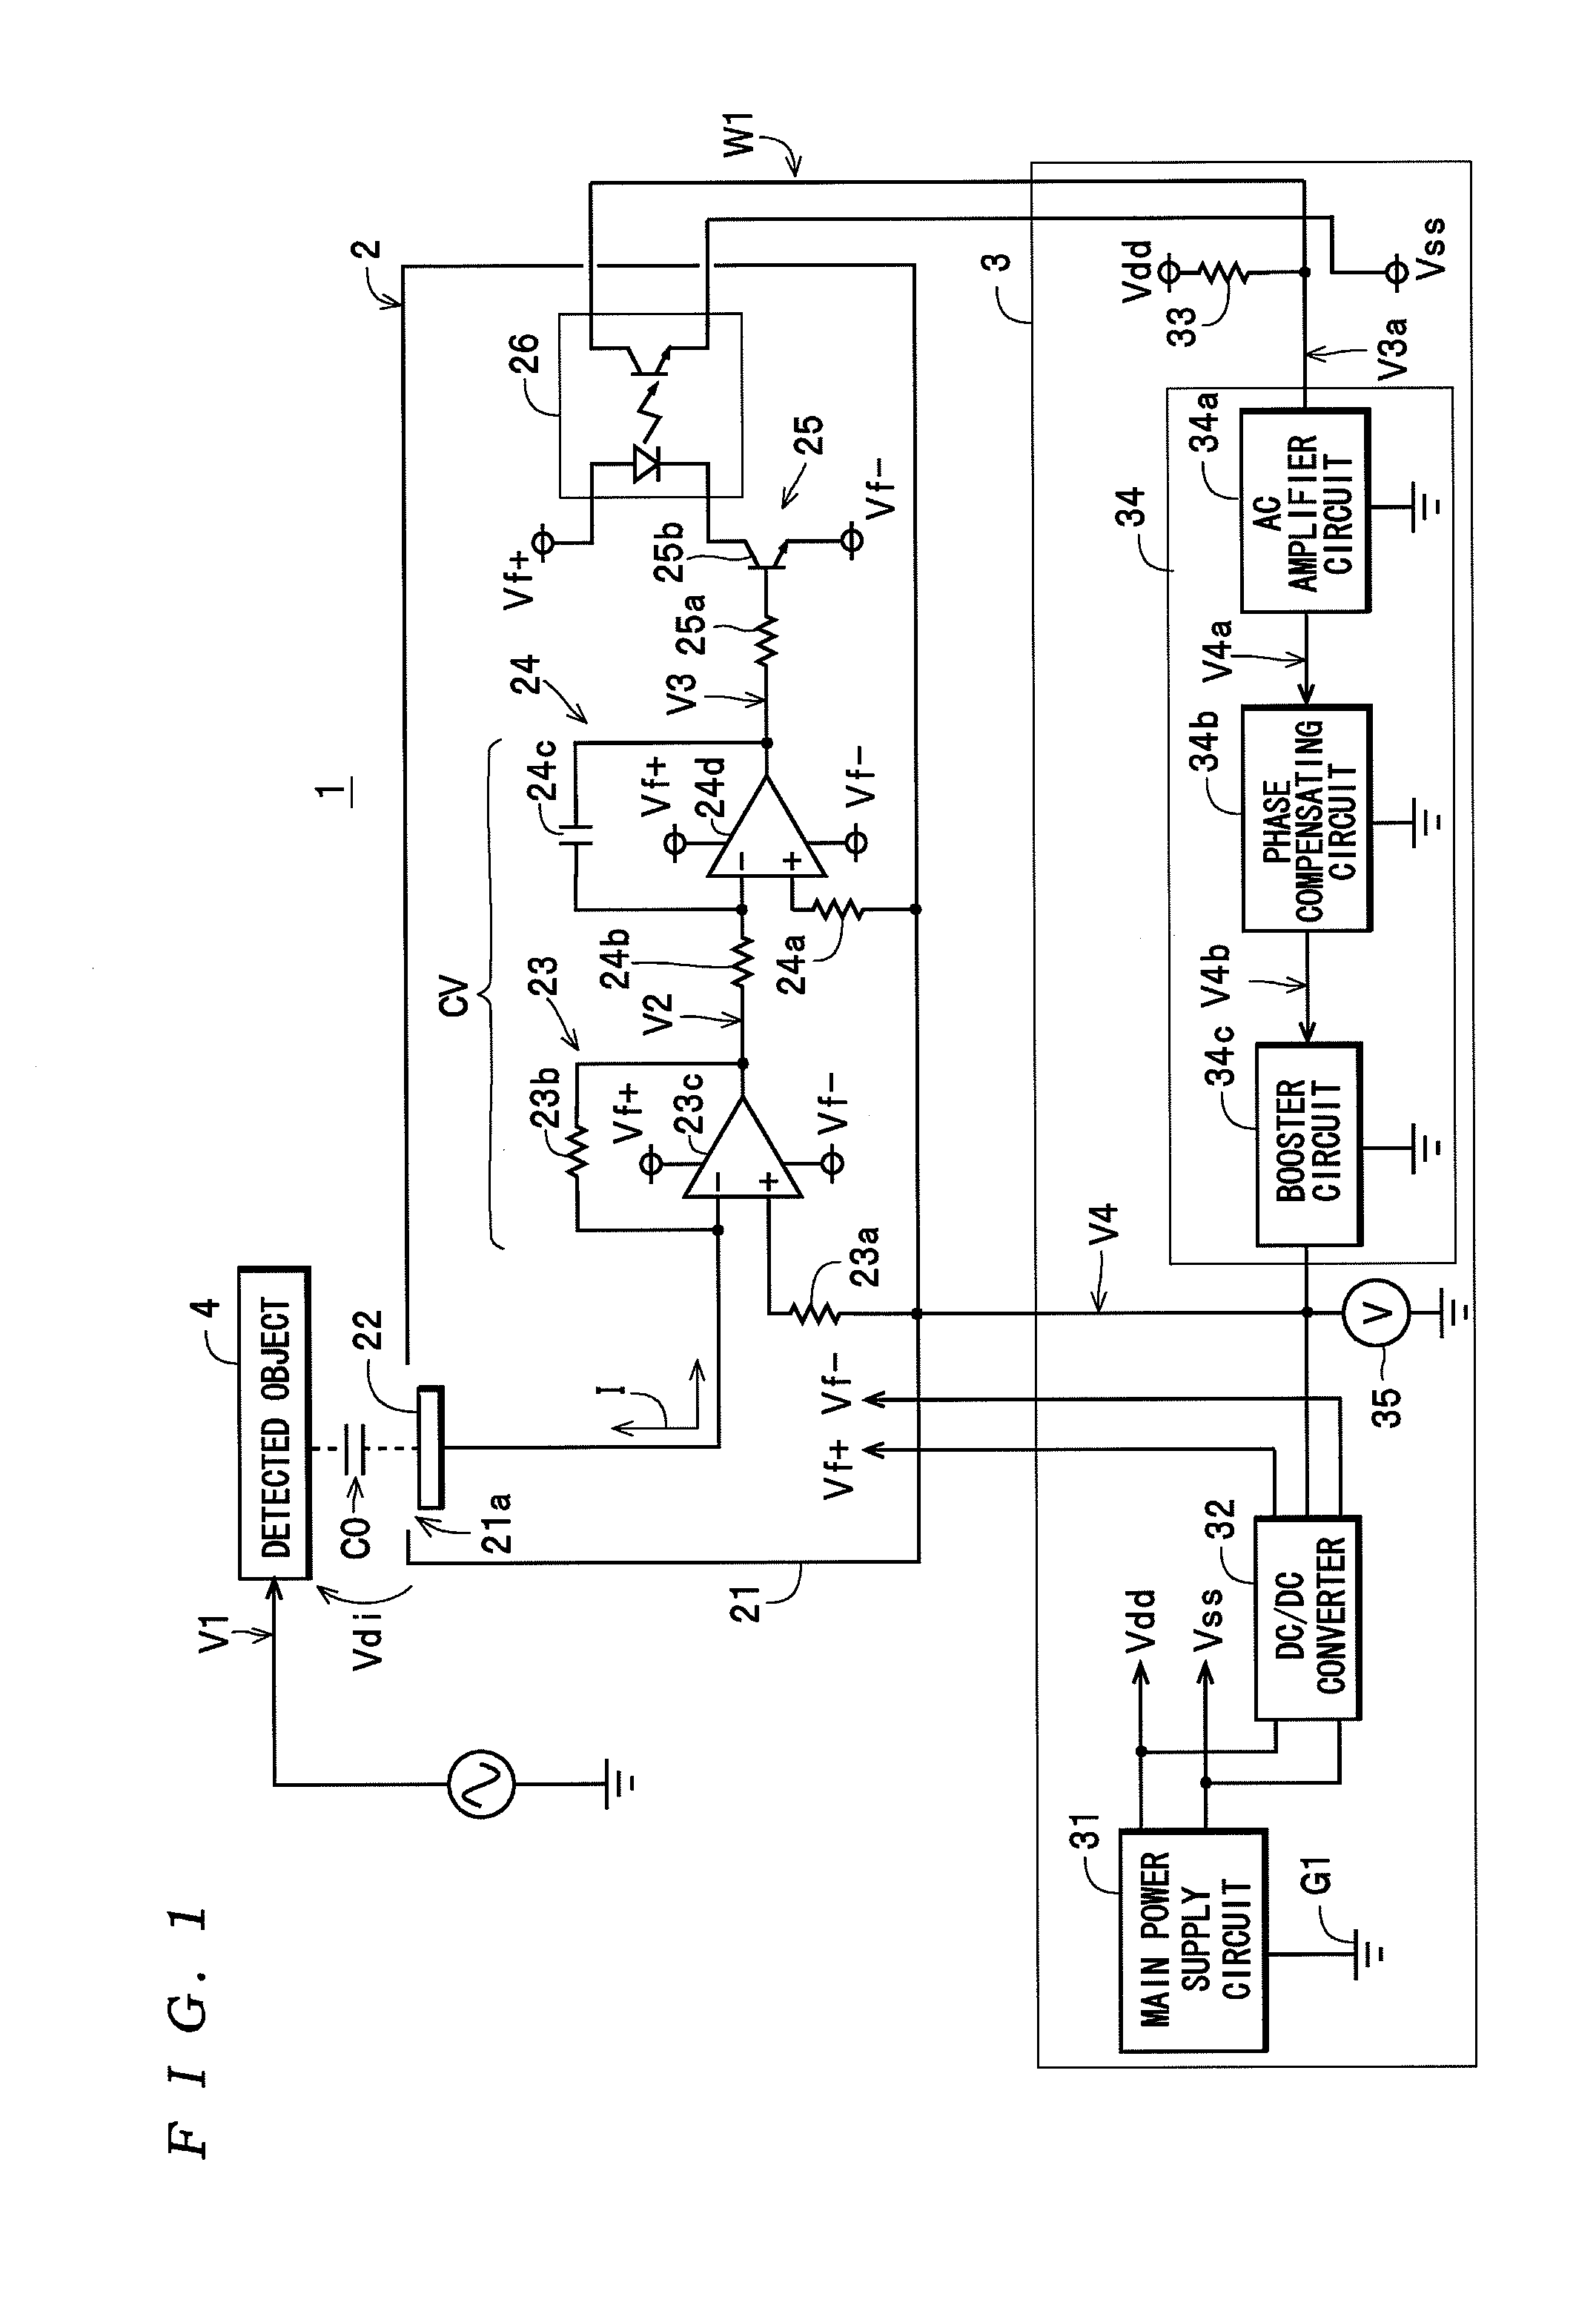 Voltage detecting apparatus and line voltage detecting apparatus having a detection electrode disposed facing a detected object